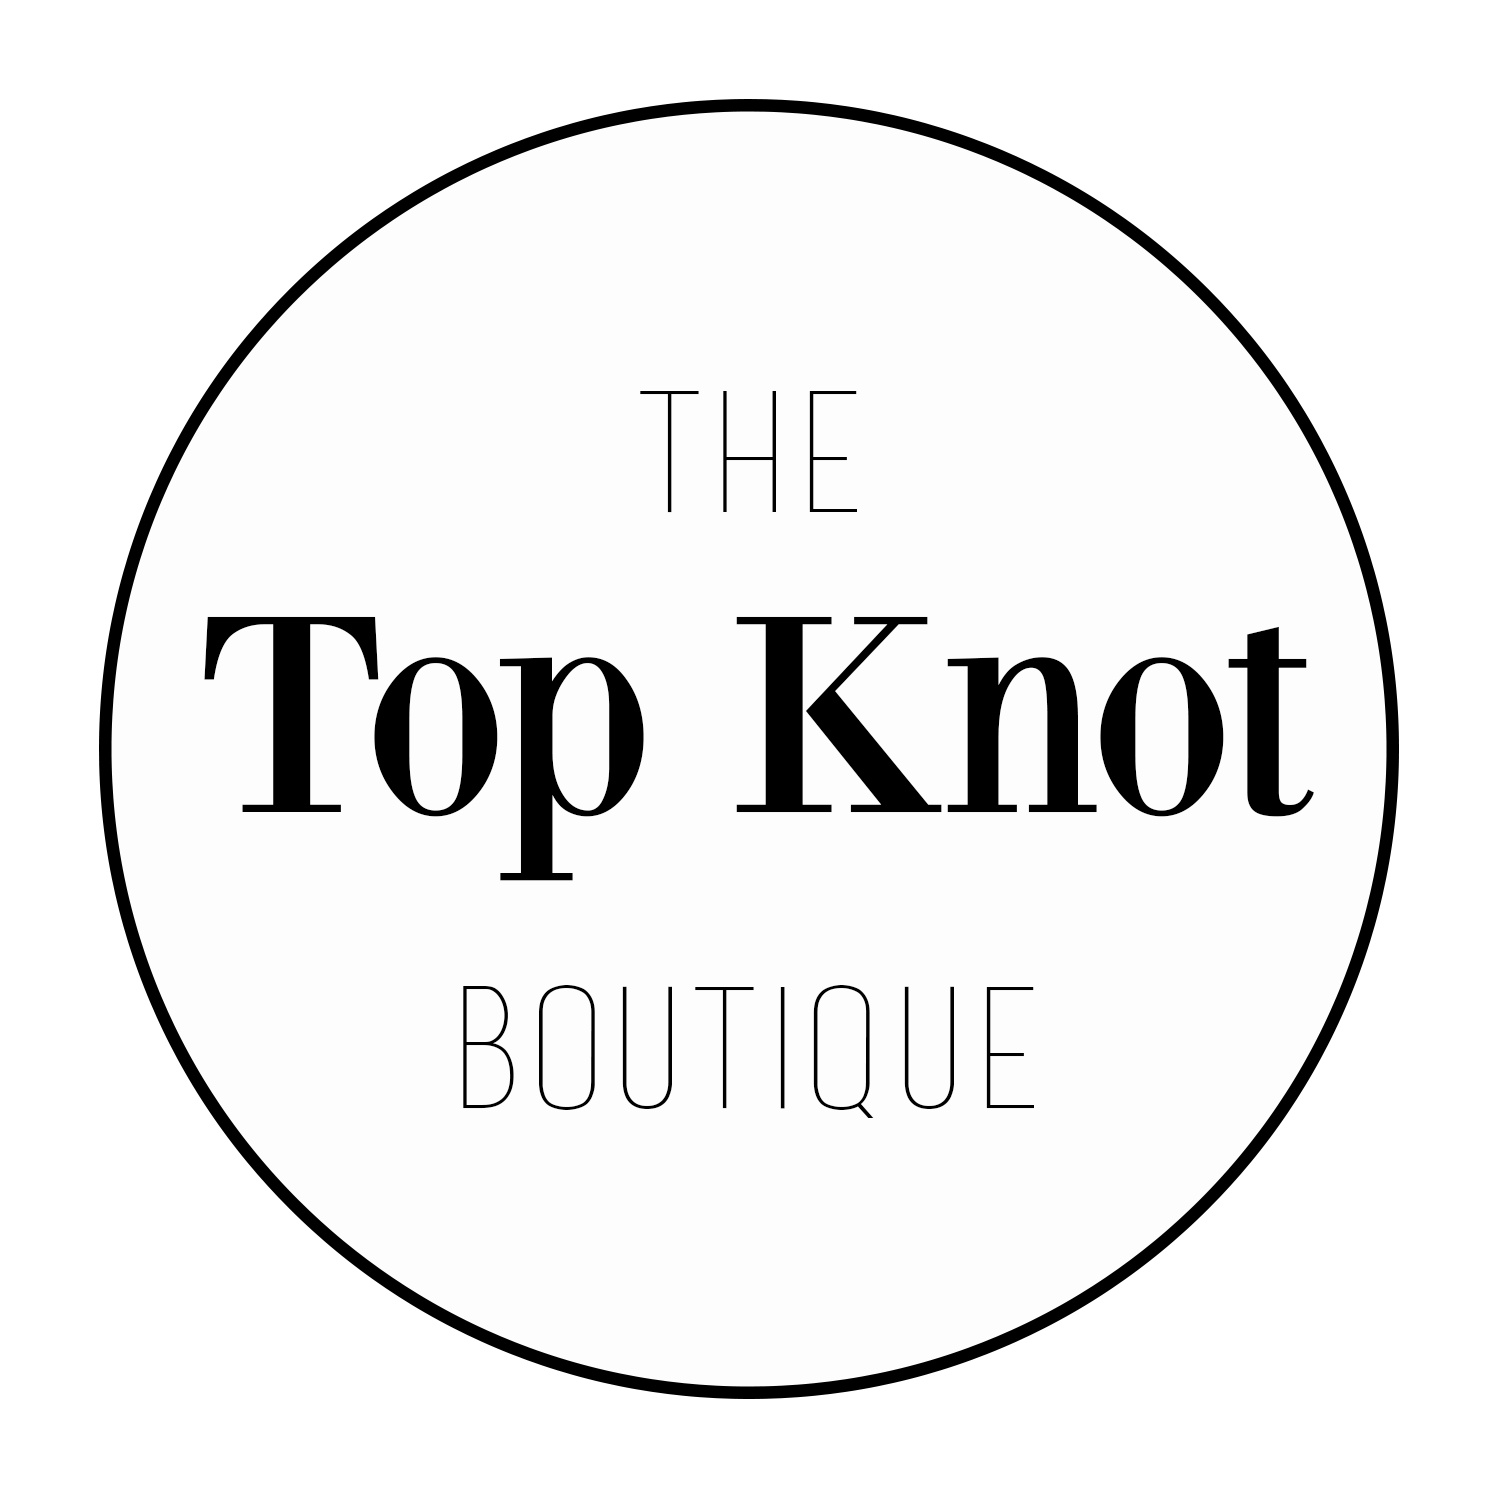 THE TOP KNOT BOUTIQUE